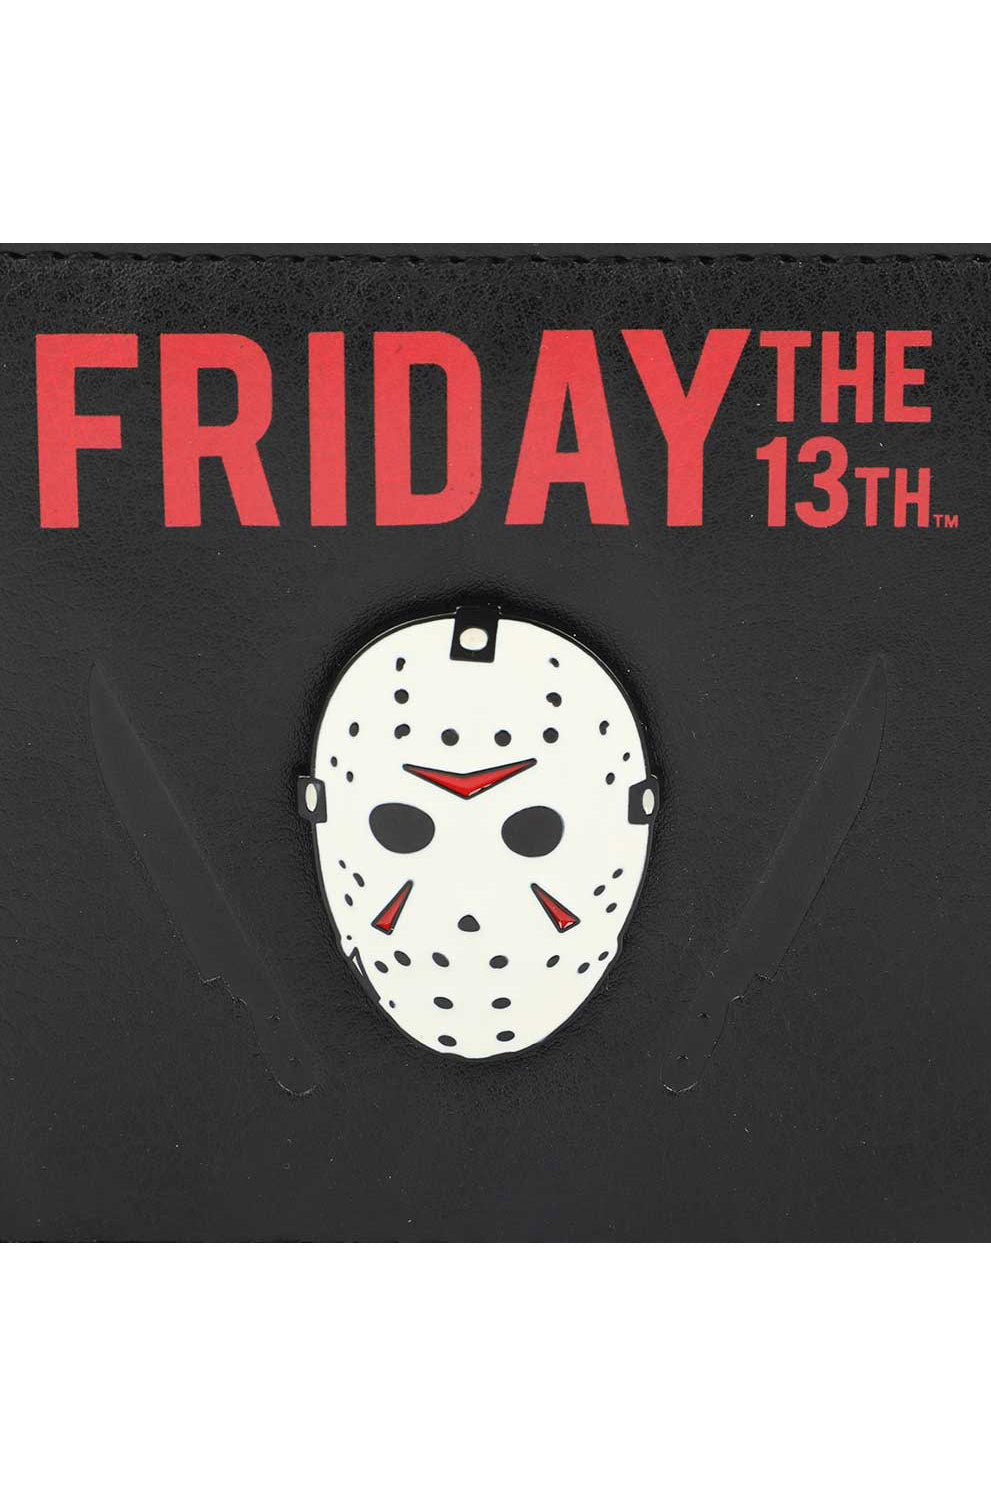 spooky friday the 13th  wallet for men